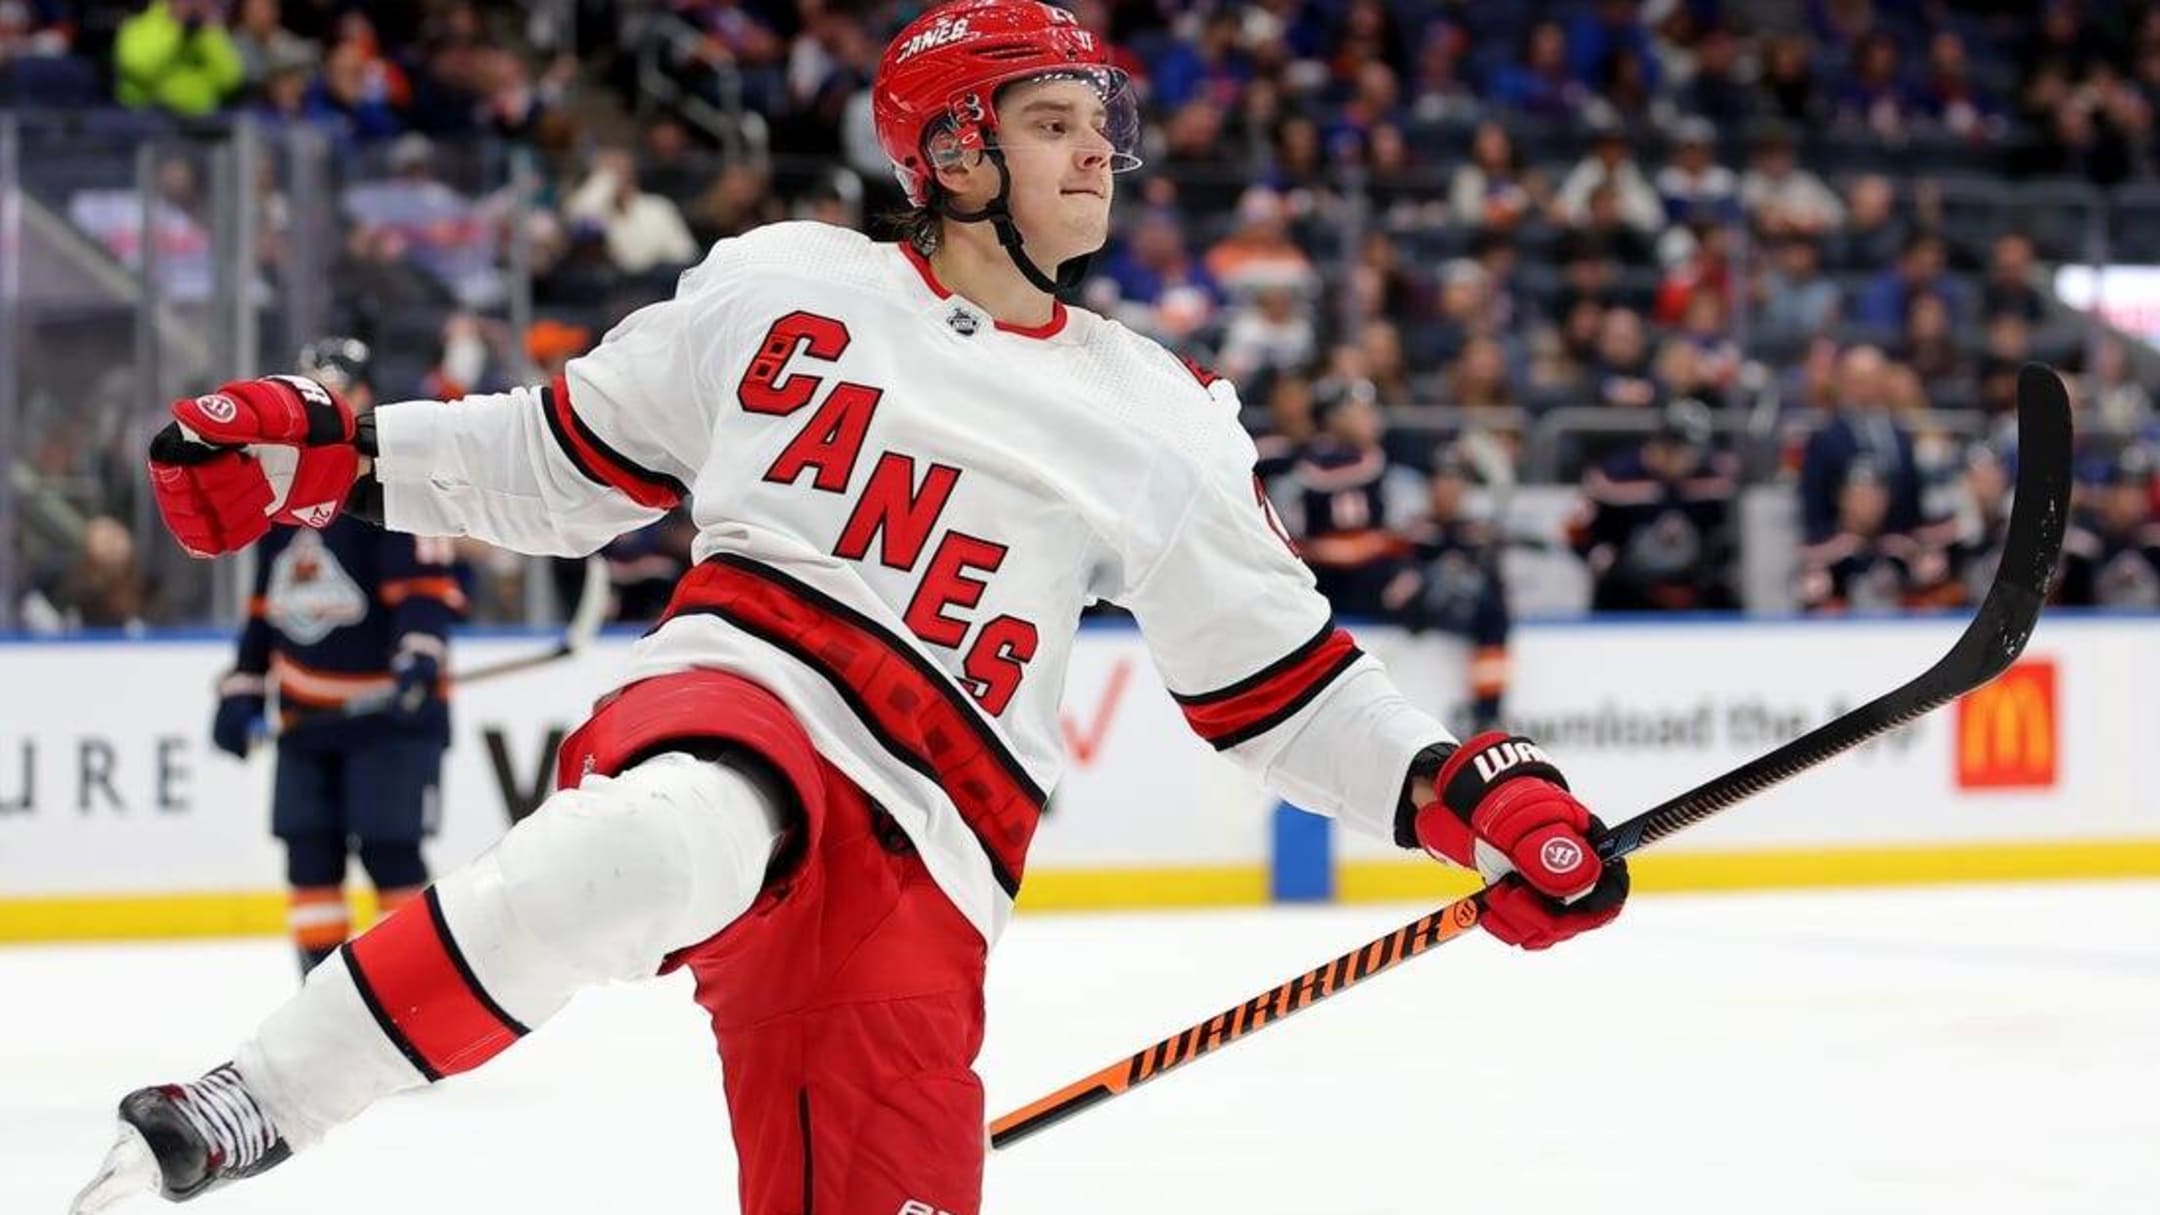 Canes' Aho, Oilers' Hyman each take a puck off the face